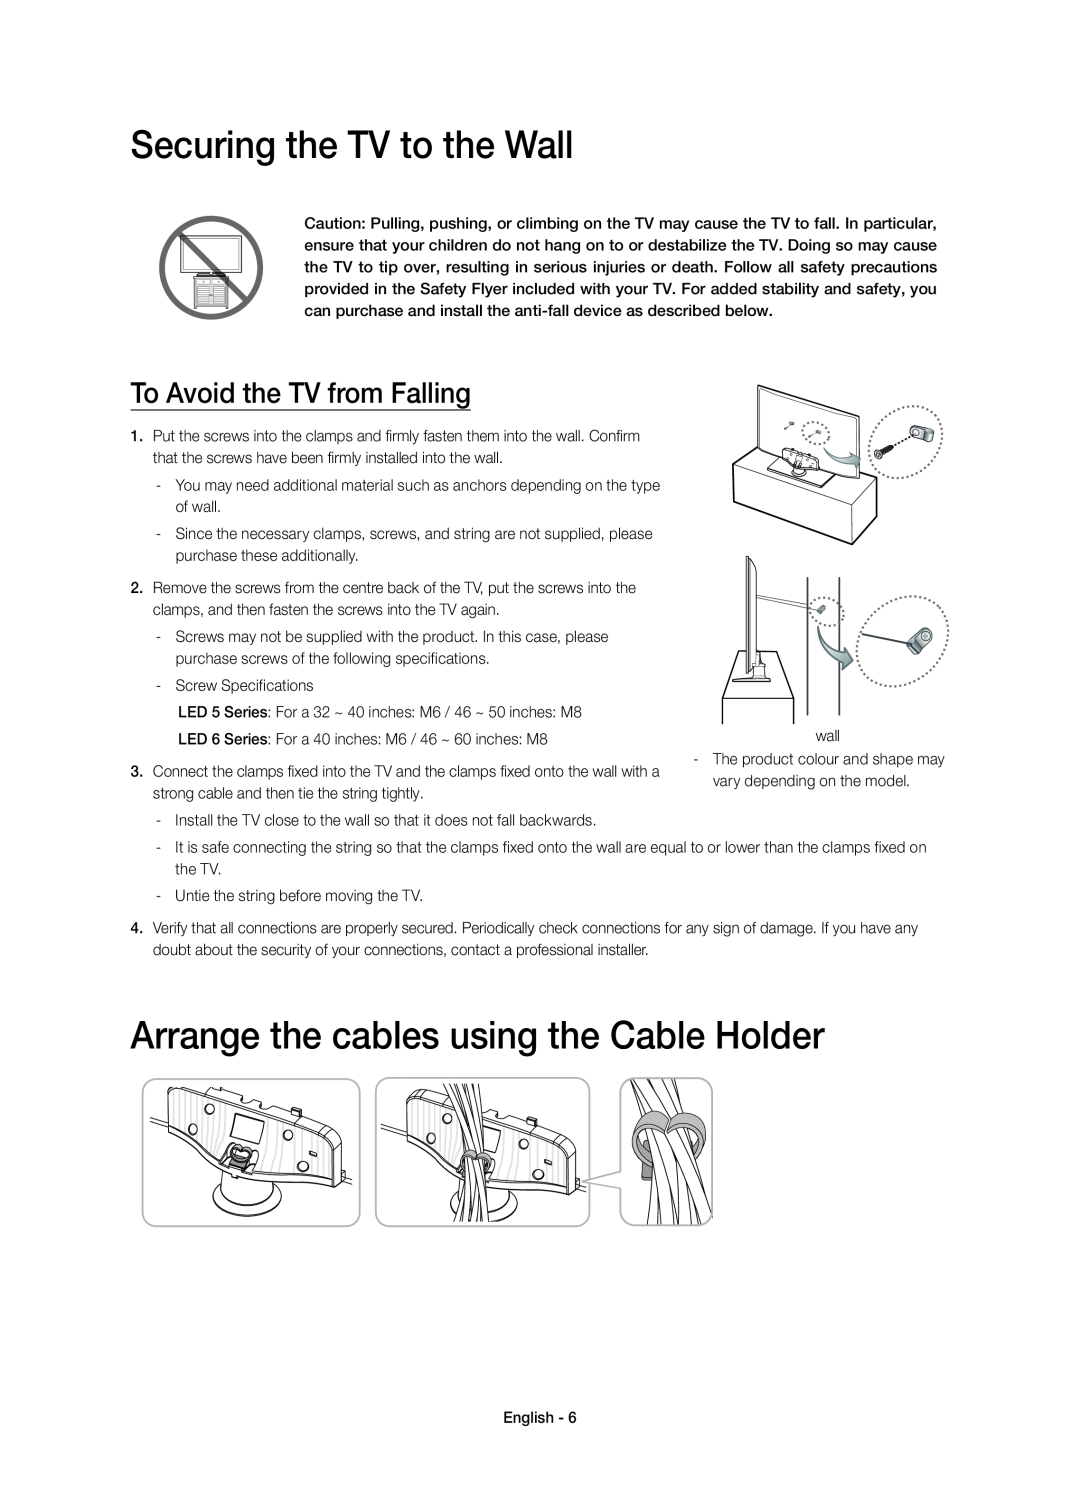 Samsung UE32H5373SSXZG, UE55H6273SSXZG manual Securing the TV to the Wall, Arrange the cables using the Cable Holder 